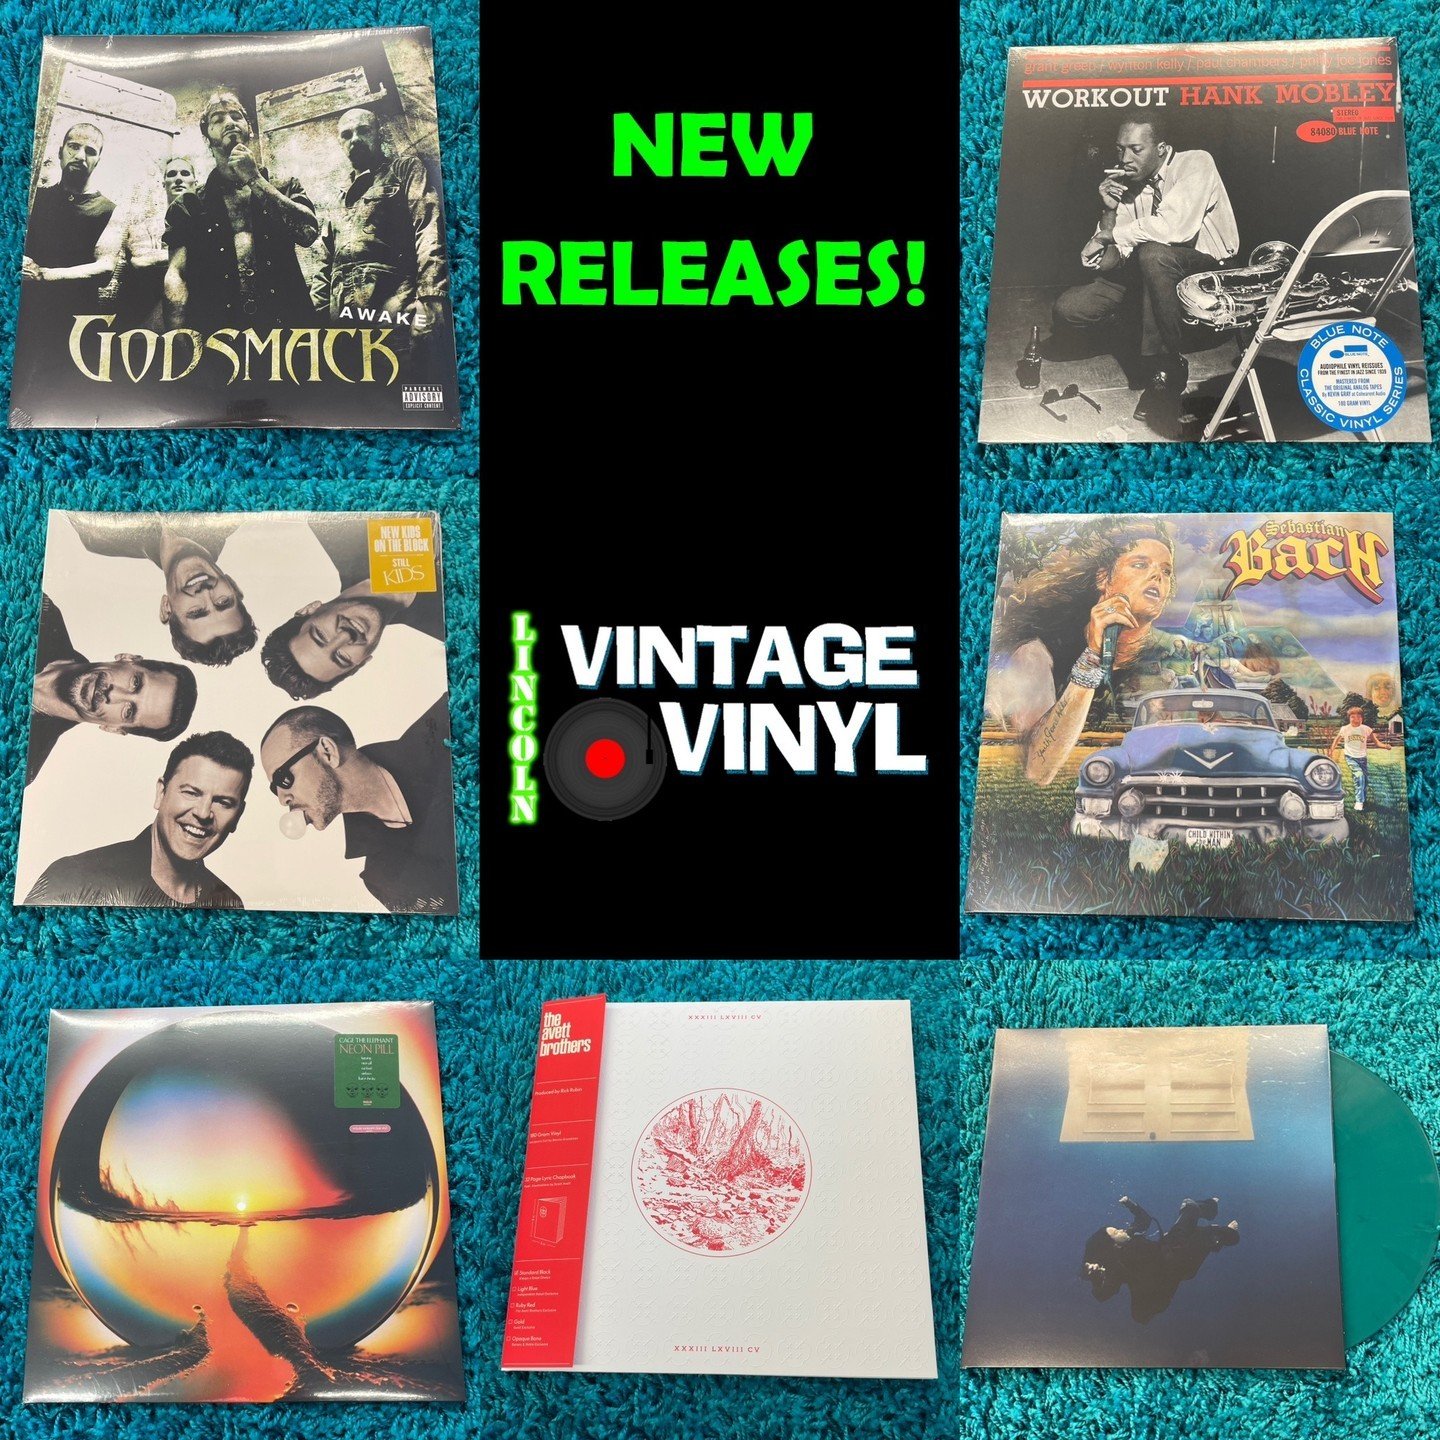 New Releases Available Tomorrow, Friday May 17th!  If you see anything you'd like us to hold for you, let us know!
🔹 #Godsmack - Awake (First Time On Vinyl!)
🔹 #HankMobley - Workout (#BlueNote Classic Series)
🔹 #NewKidsOnTheBlock - Still Kids
🔹 #